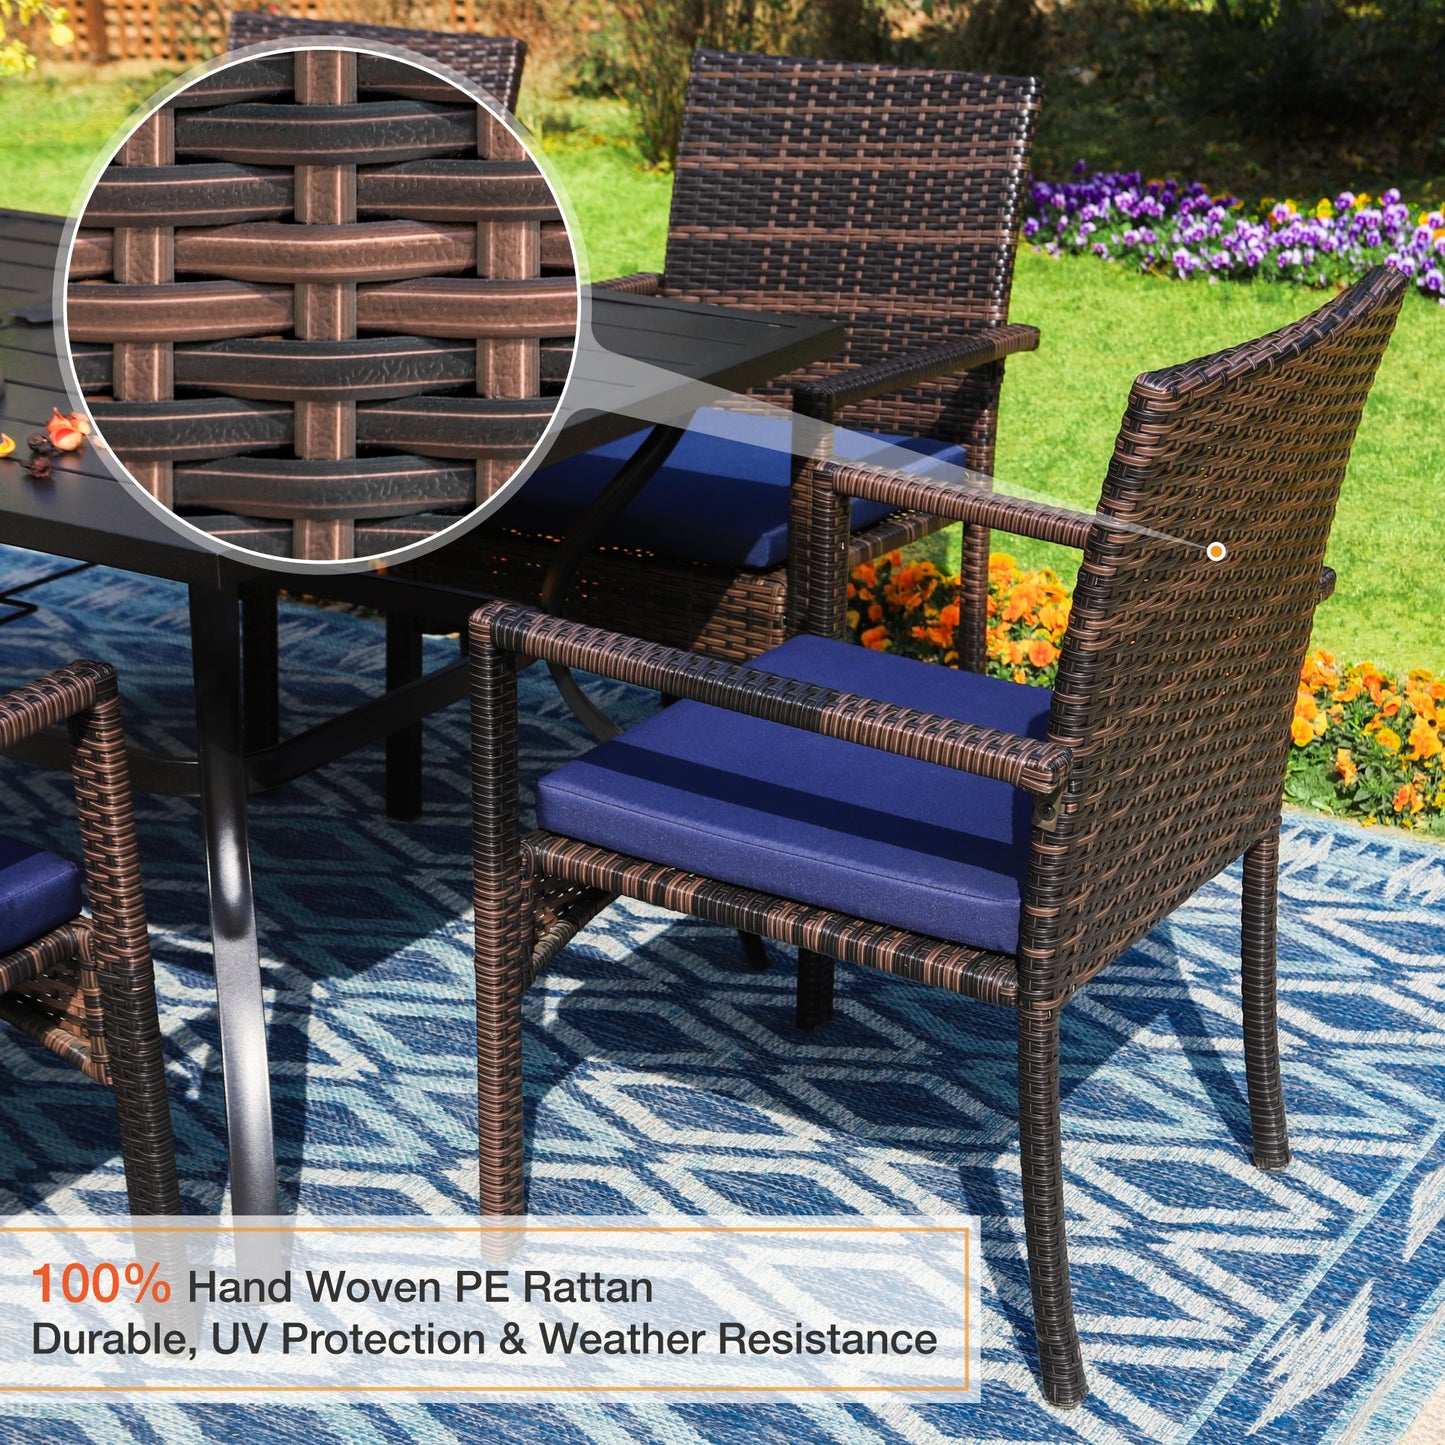 Sophia & William 8 Pieces Outdoor Patio Dining Set with 13 ft Orange Red Umbrella, Rattan Chairs & Metal Table for 6